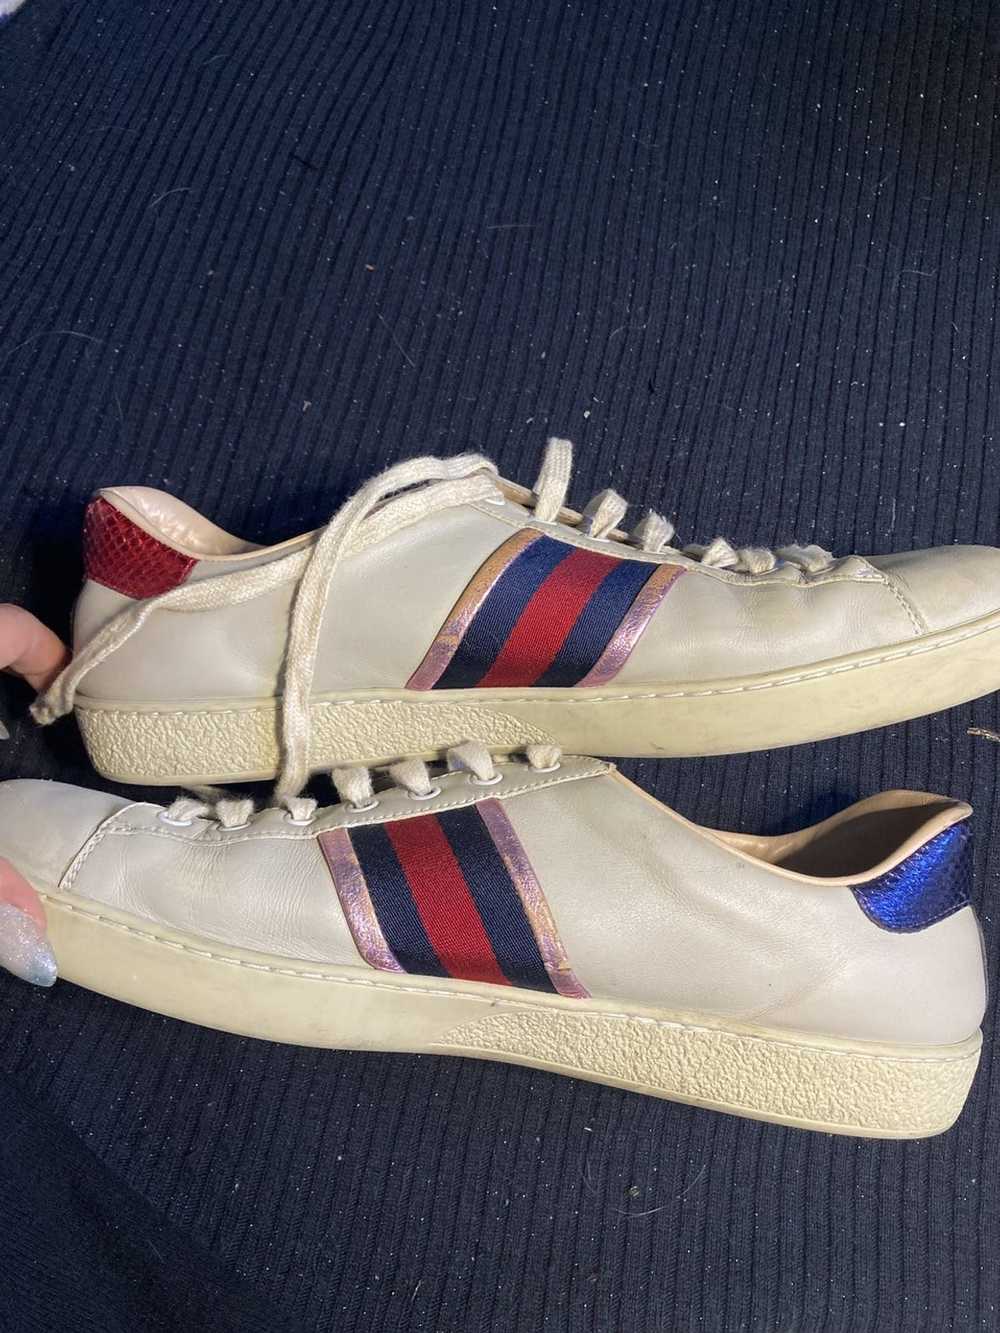 Gucci Gucci flame ace sneaker - image 7